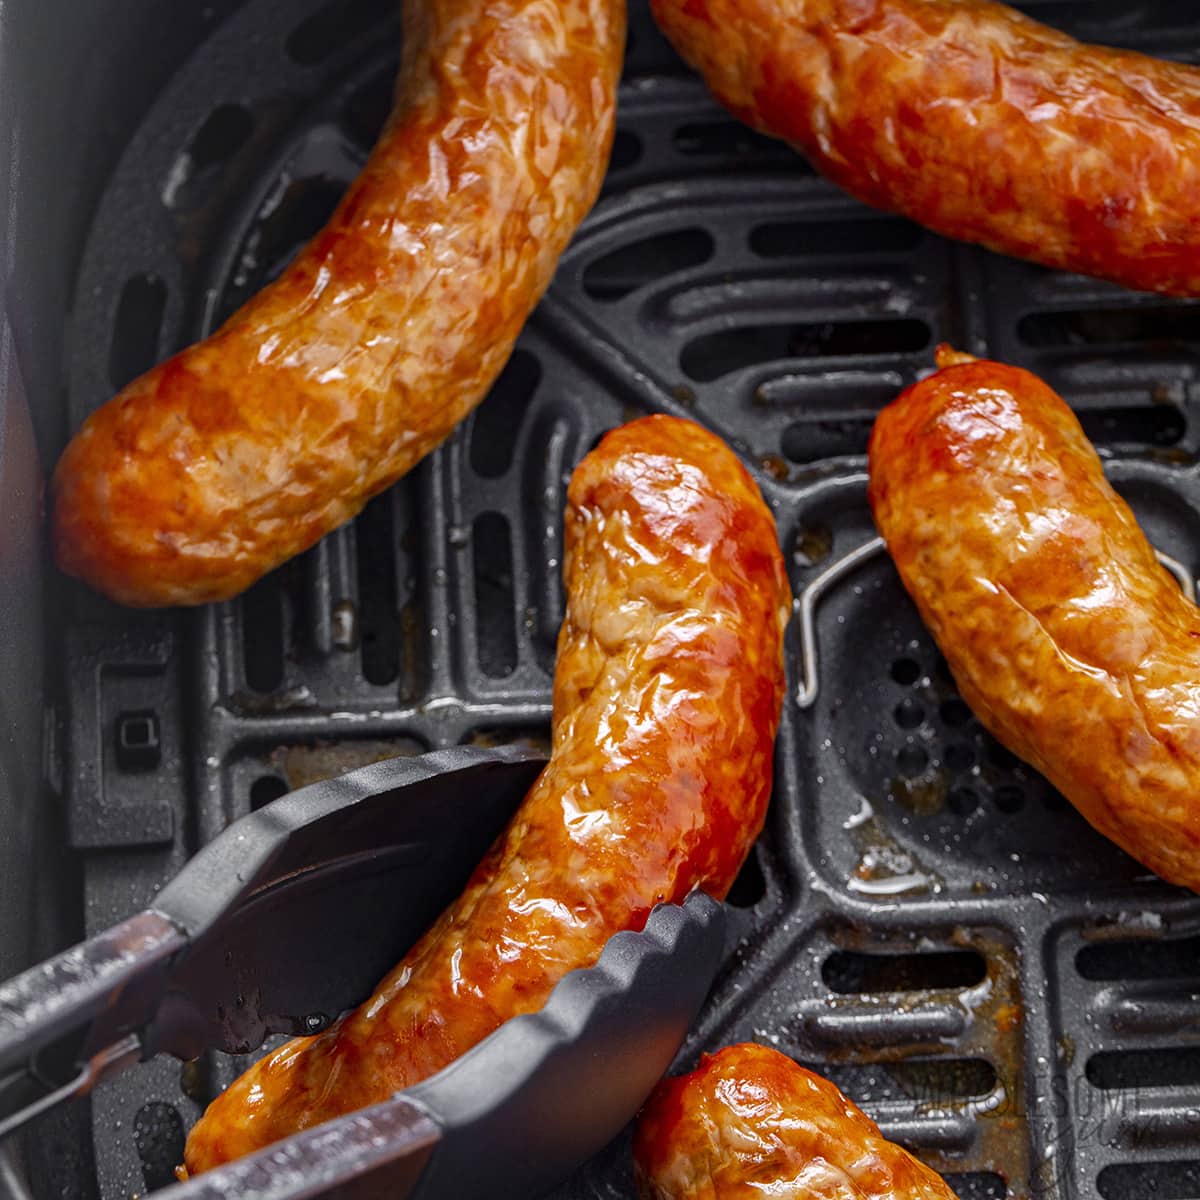 Use tongs to pick up the cooked air fryer sausage.